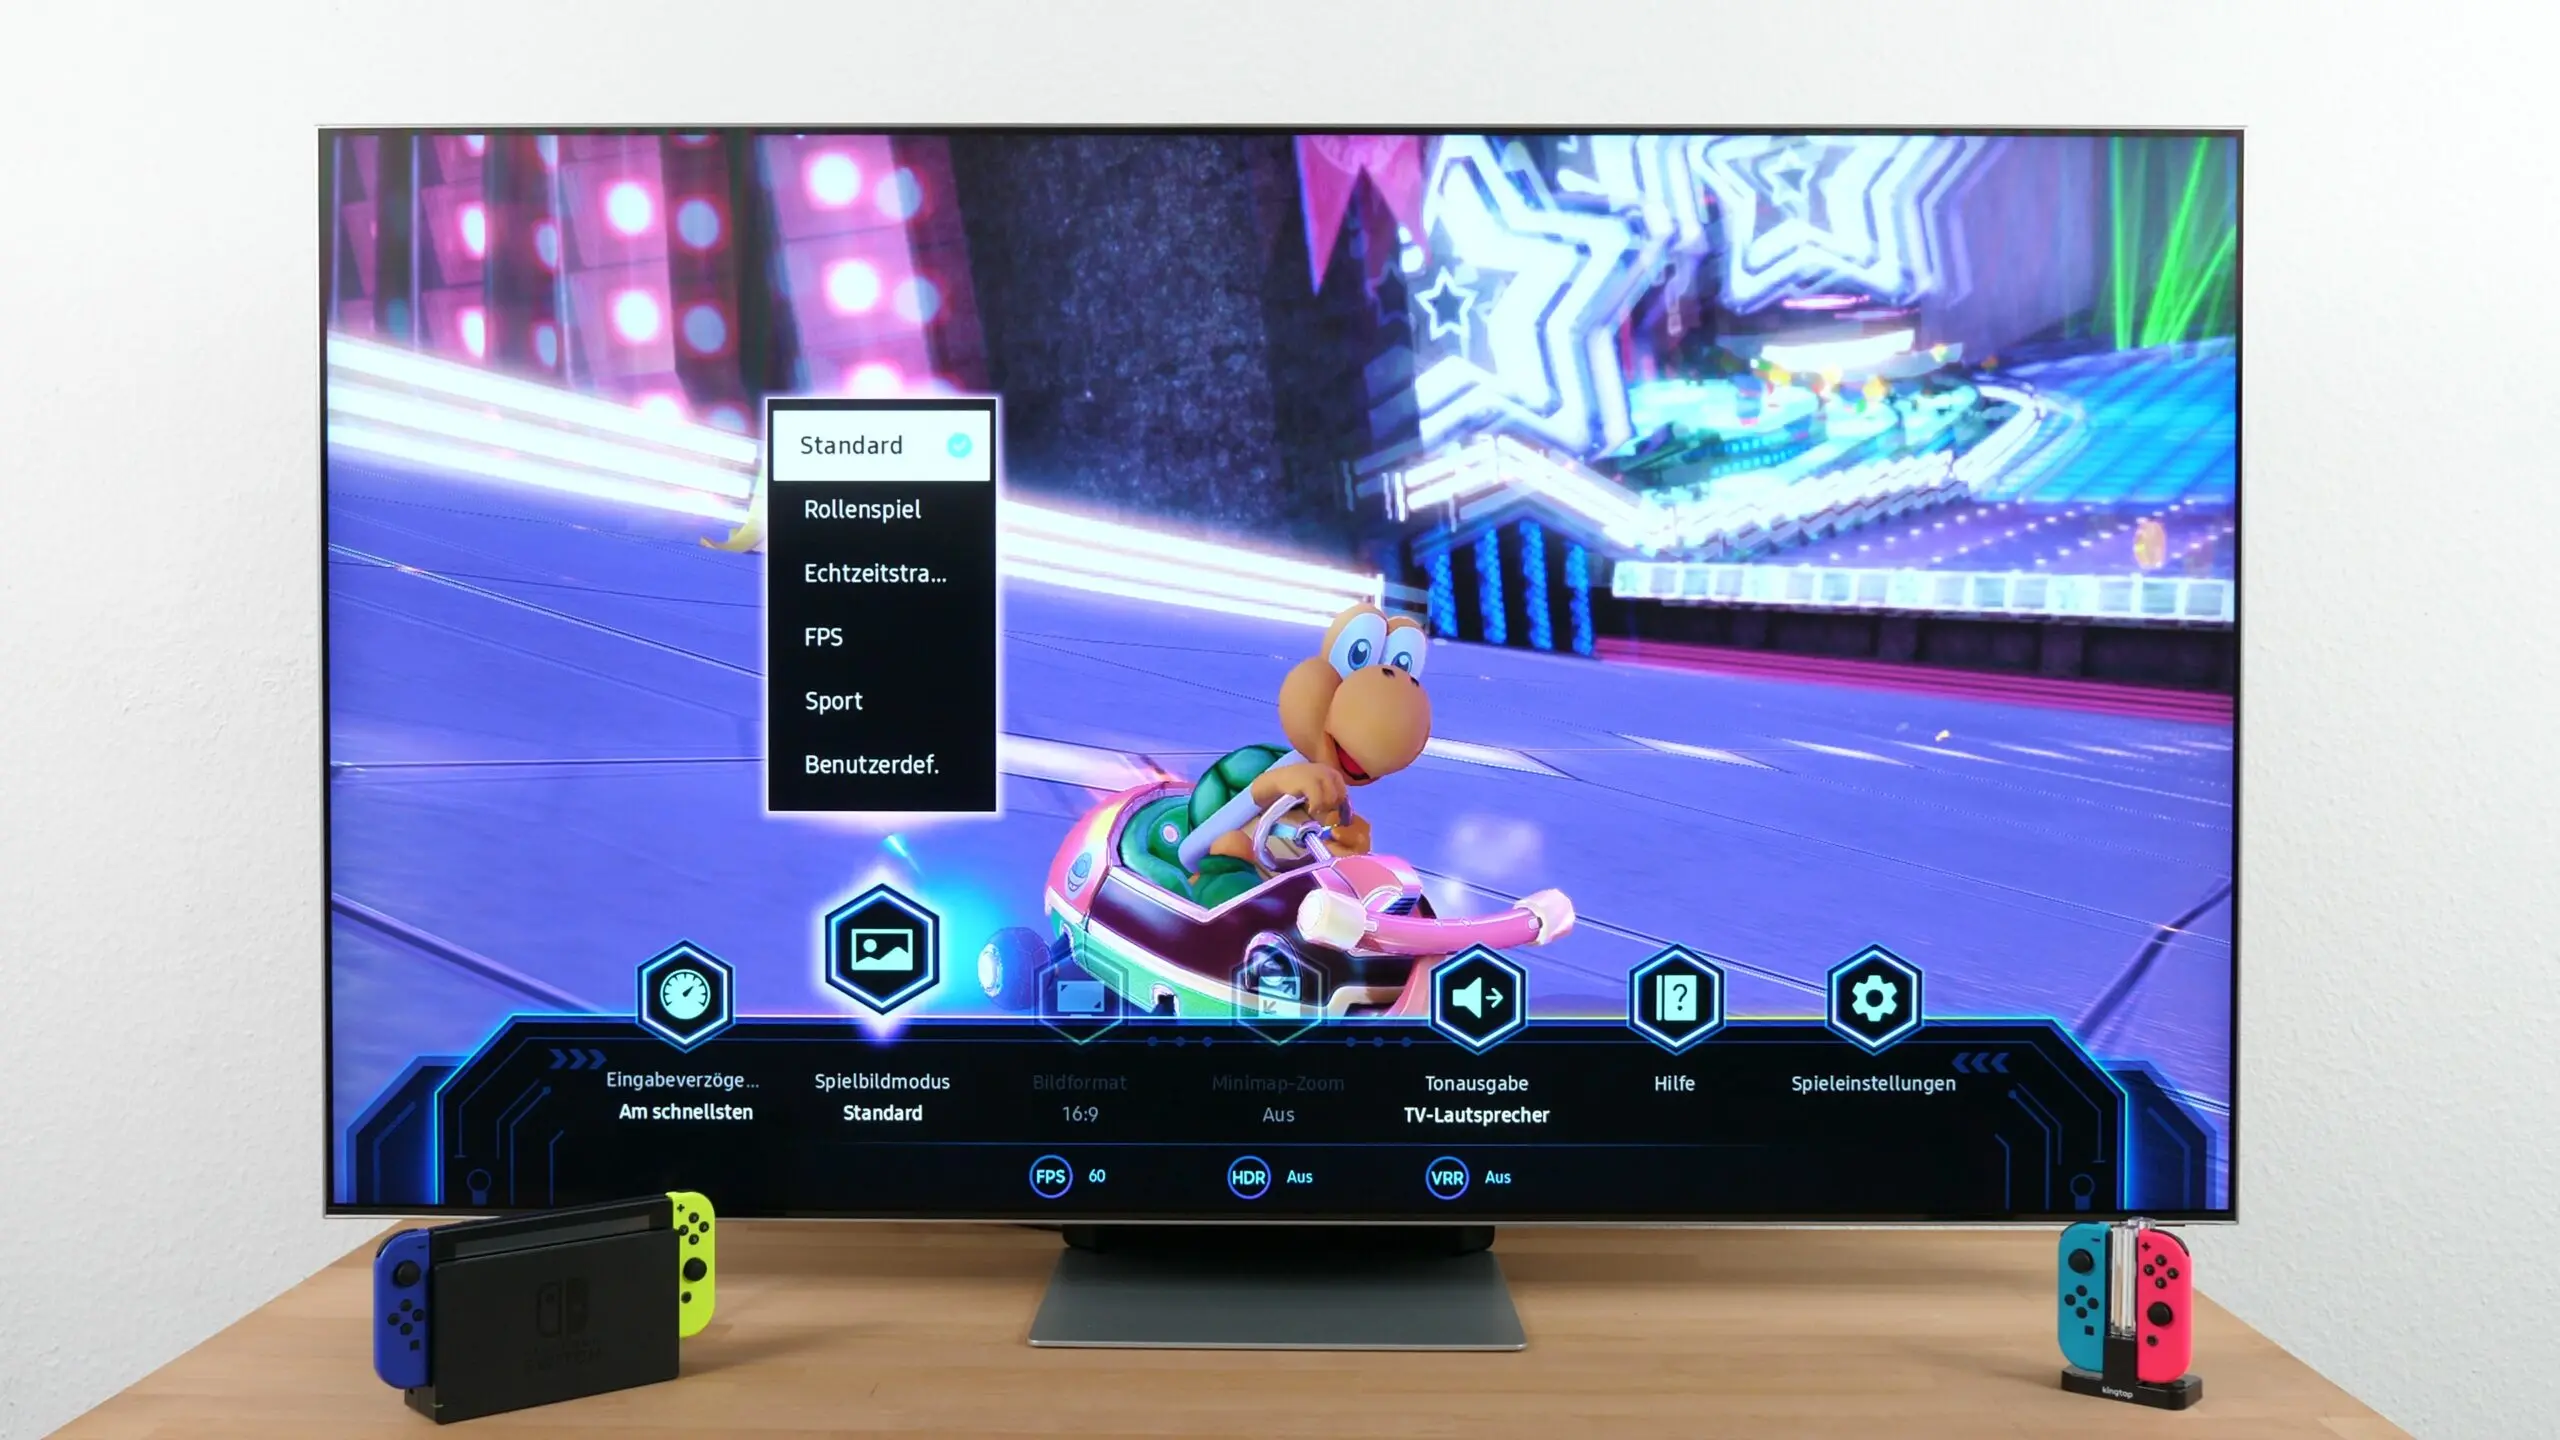 A Samsung Gaming TV showing off it's display menu with options for better FPS and other settings while playing Mario Kart